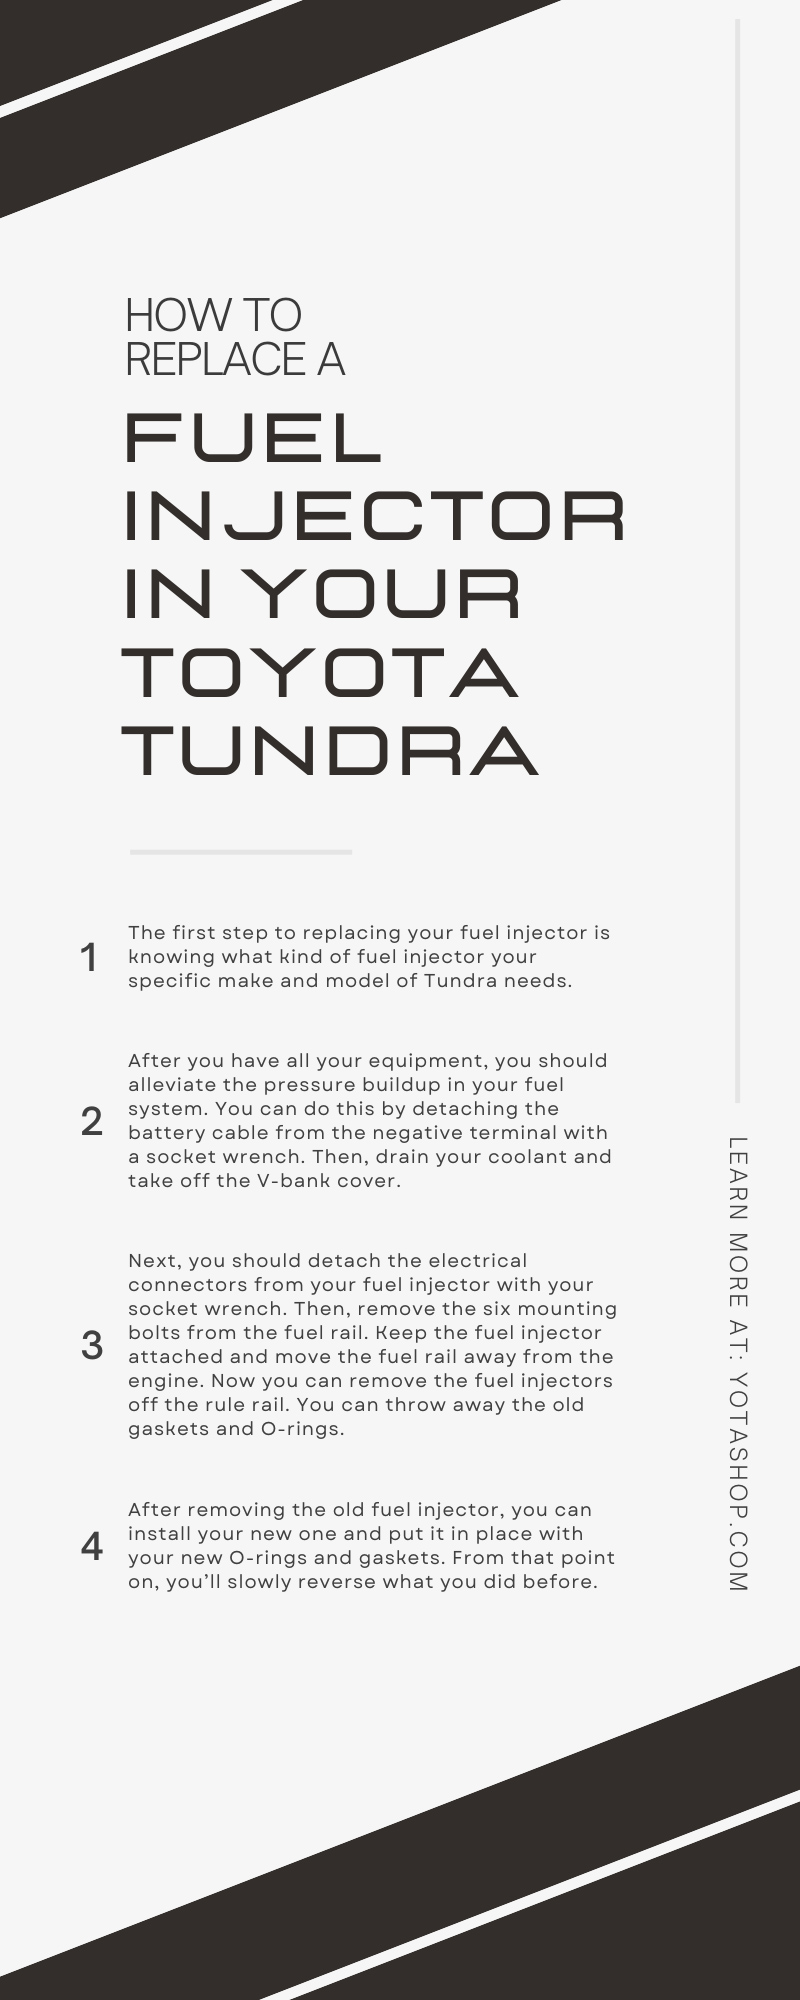 How To Replace a Fuel Injector in Your Toyota Tundra